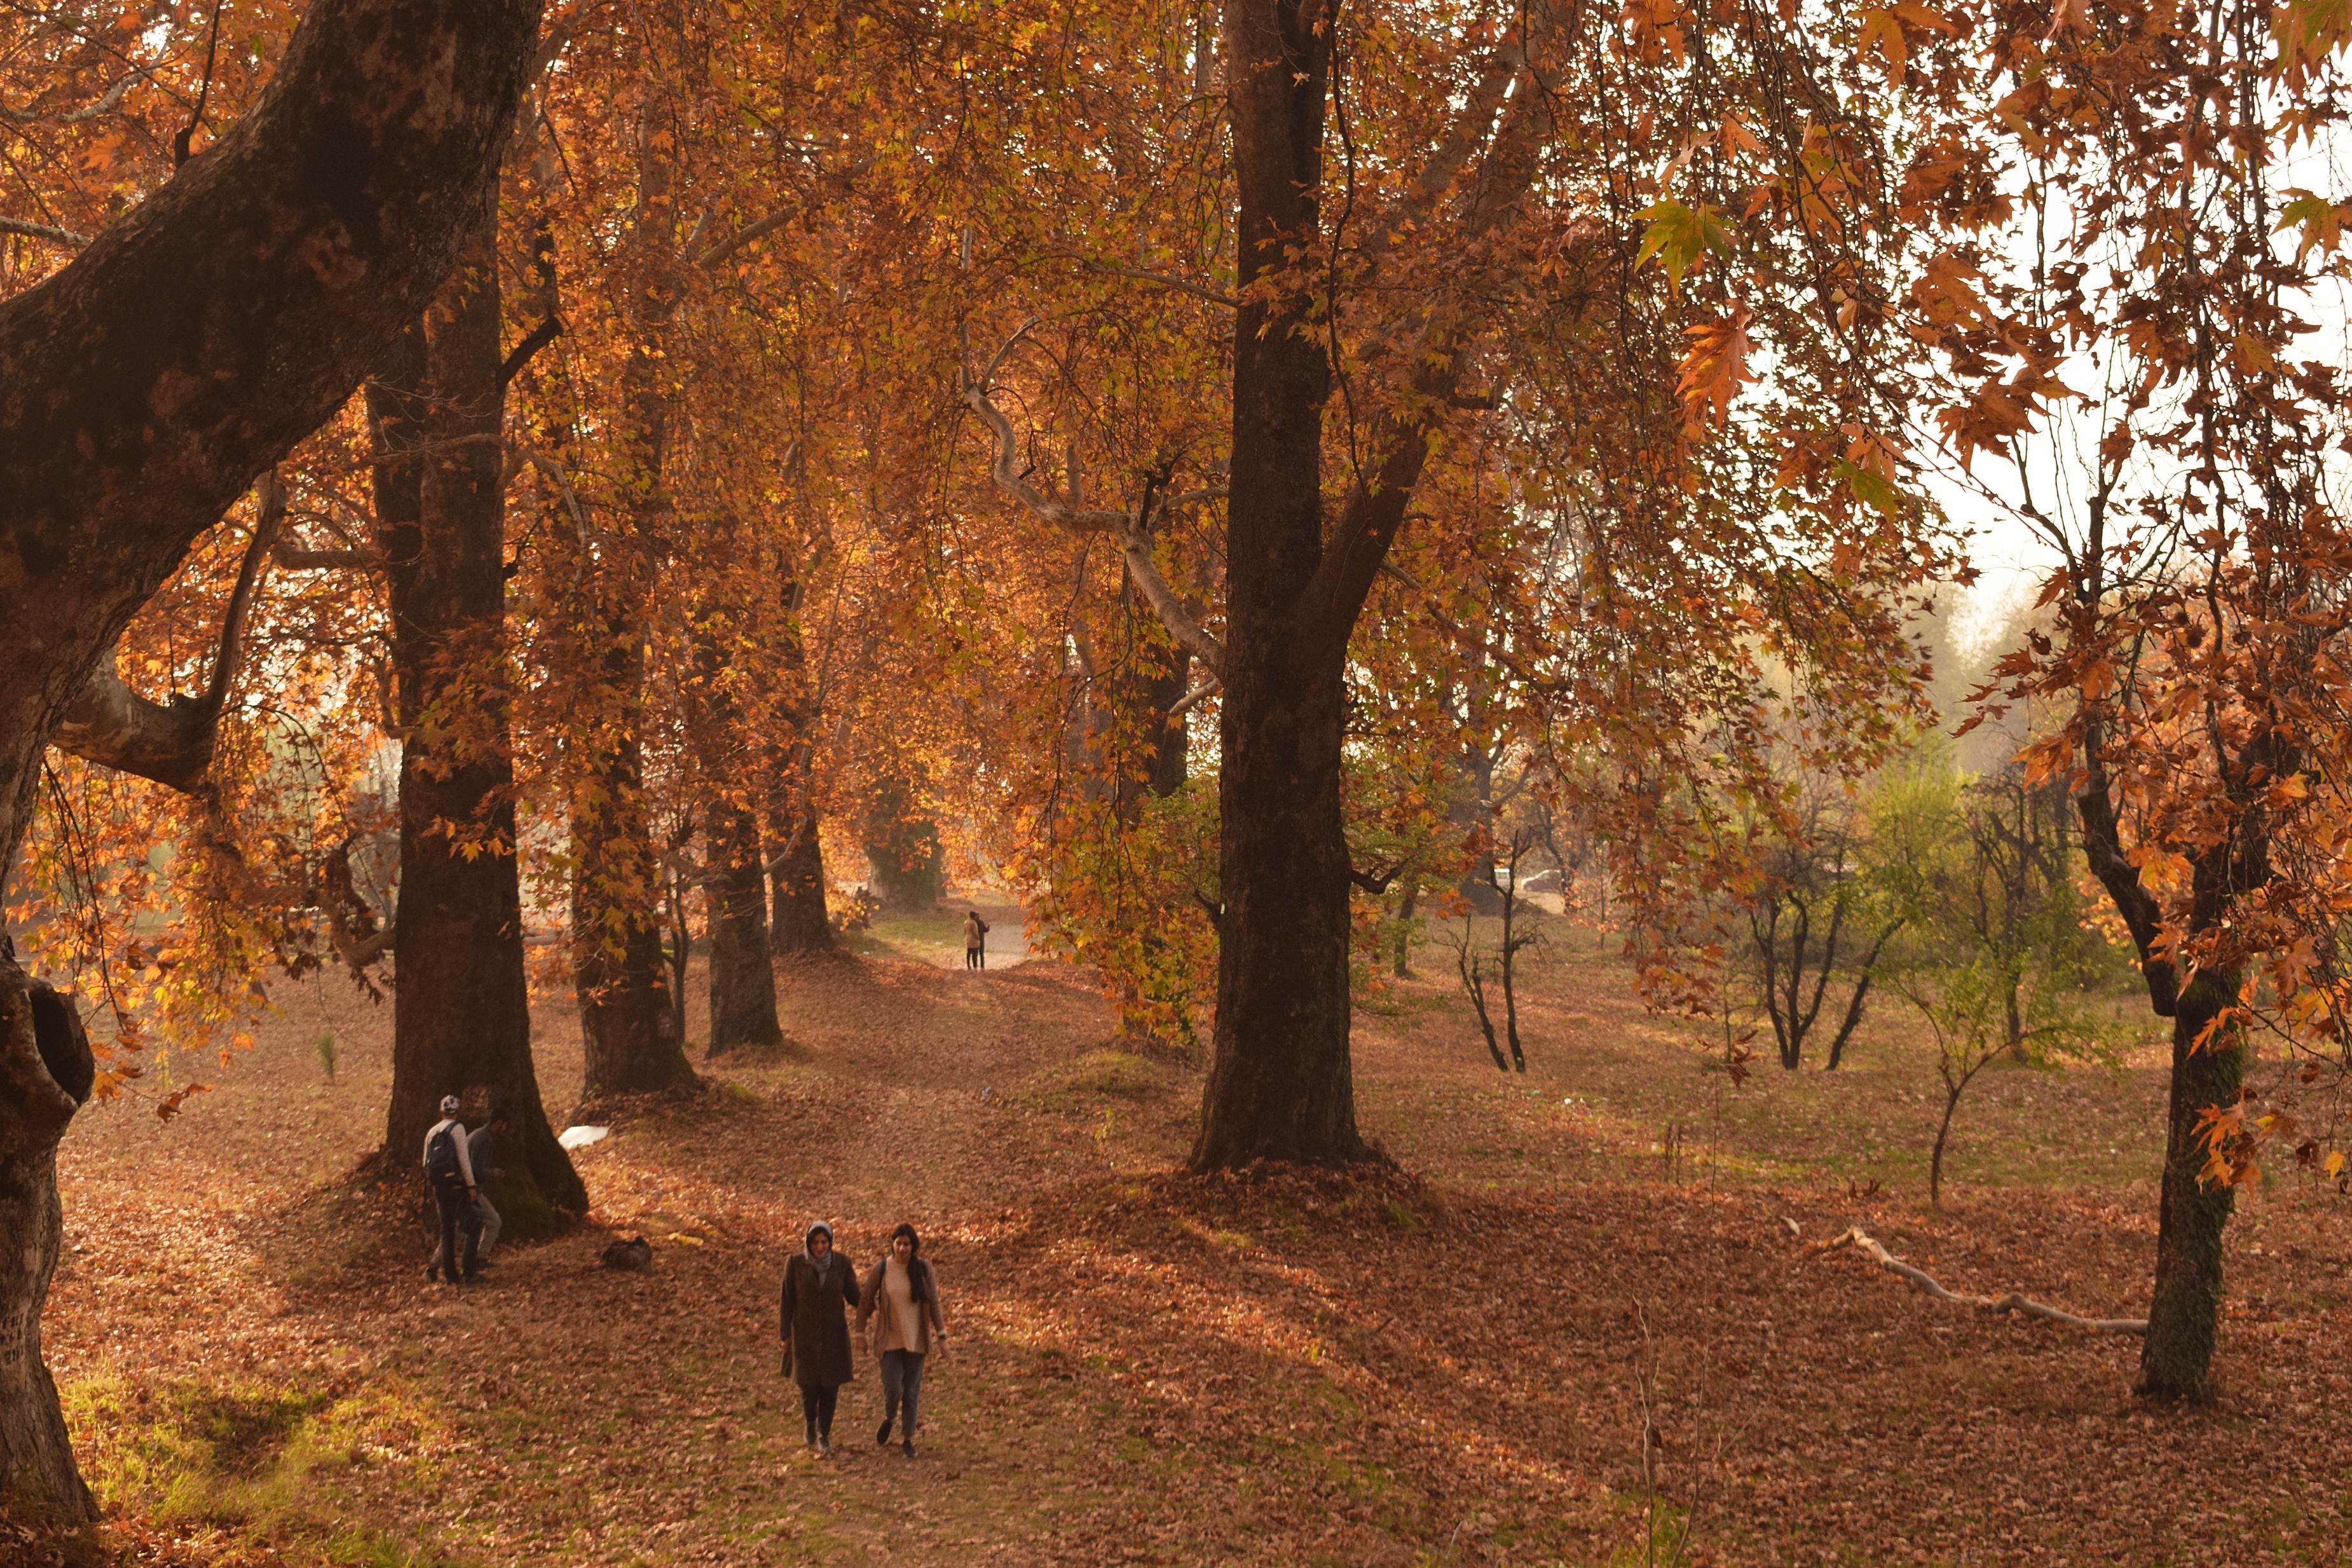 Kashmir women walking through the garden covered with dried Chinar leaves in Srinagar